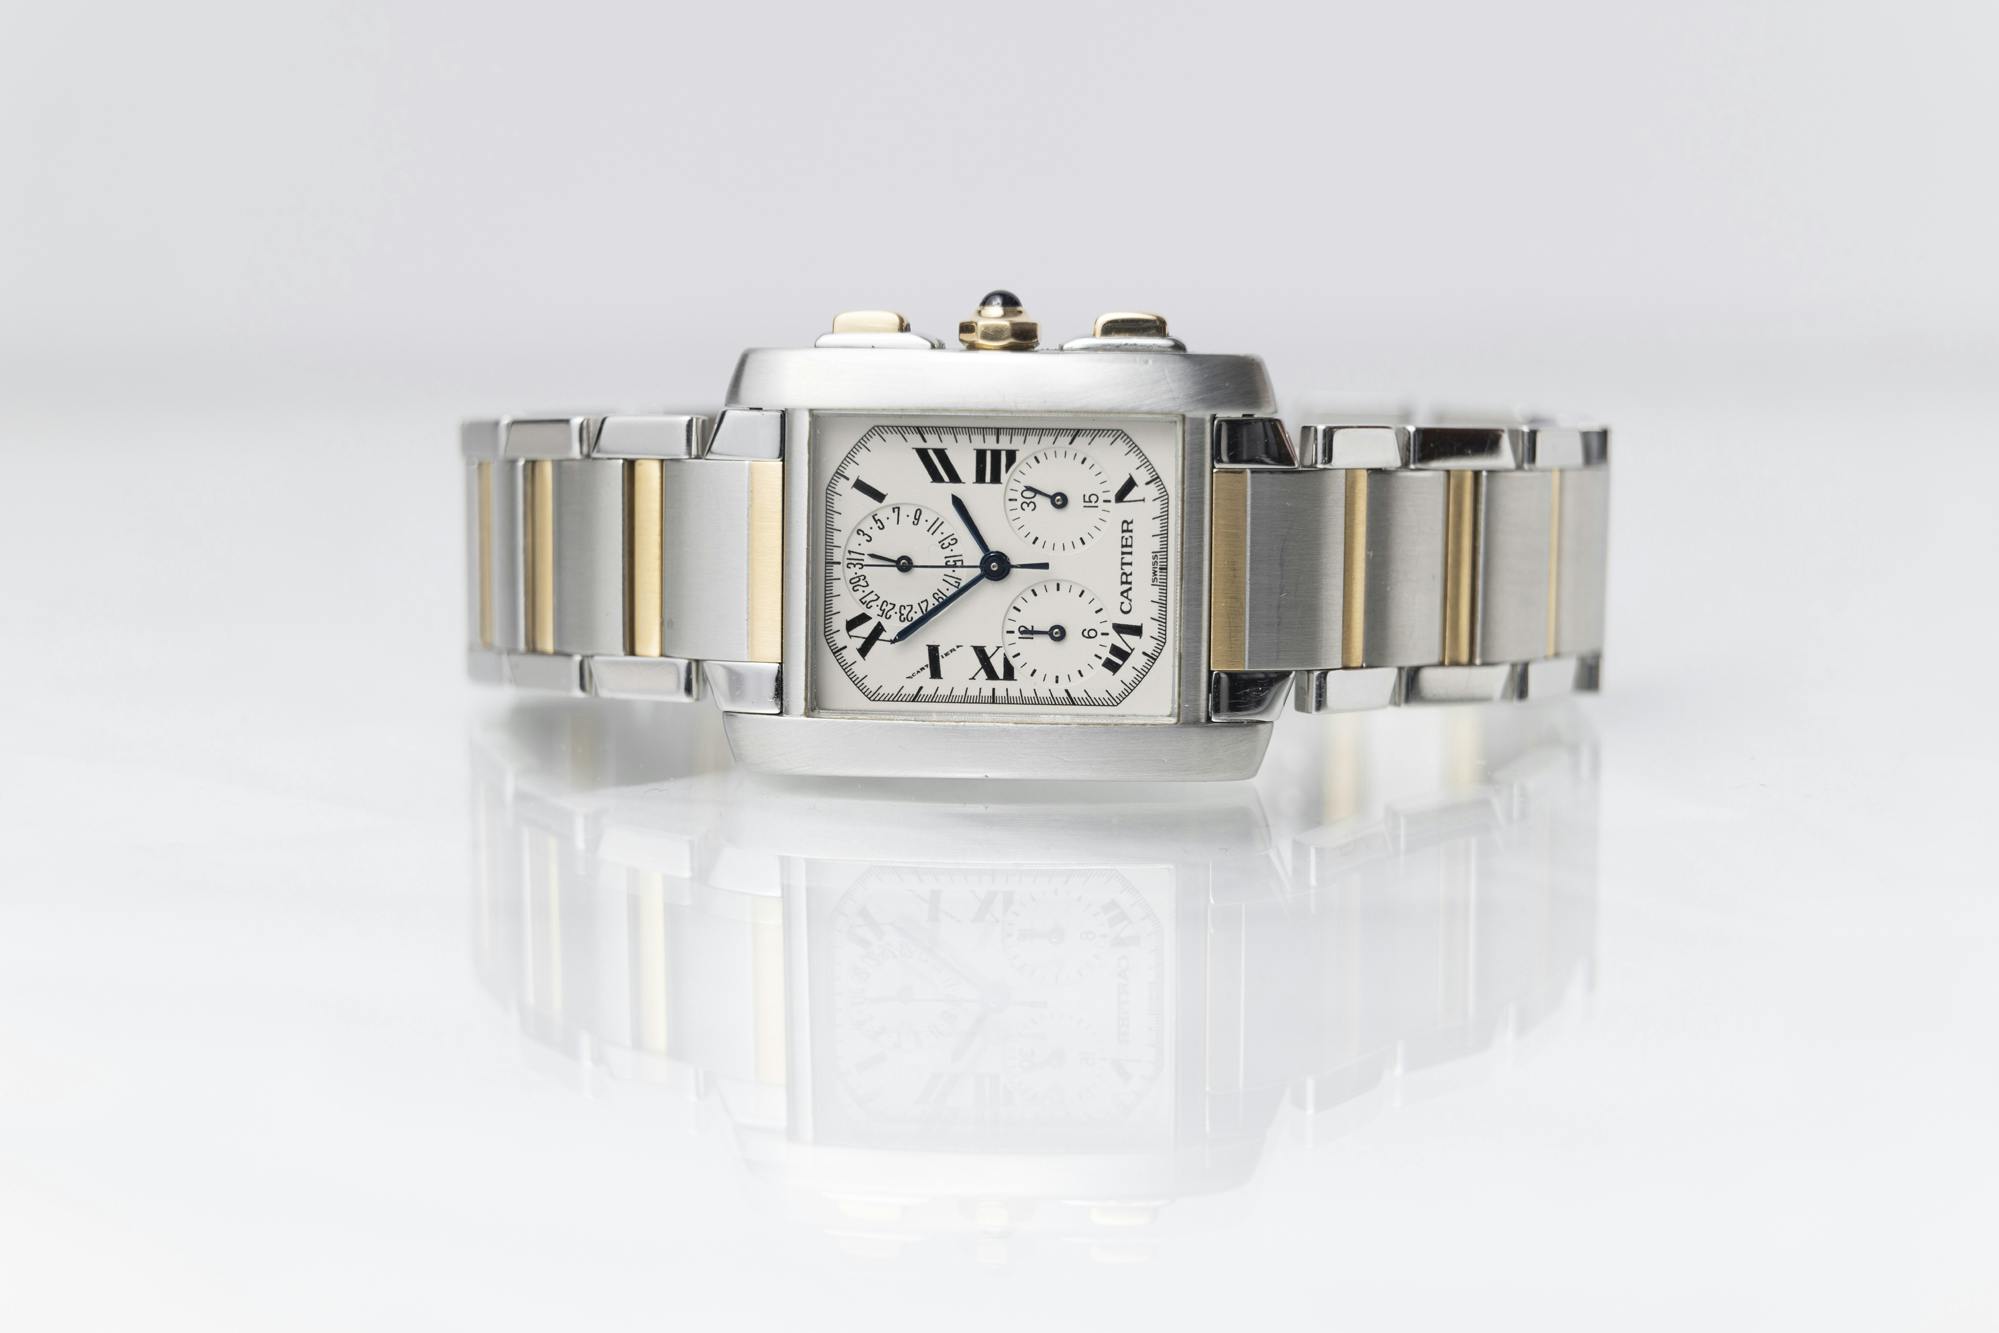 2006 CARTIER TANK FRANÇAISE CHRONOFLEX for sale by auction in Dundee,  Scotland, United Kingdom